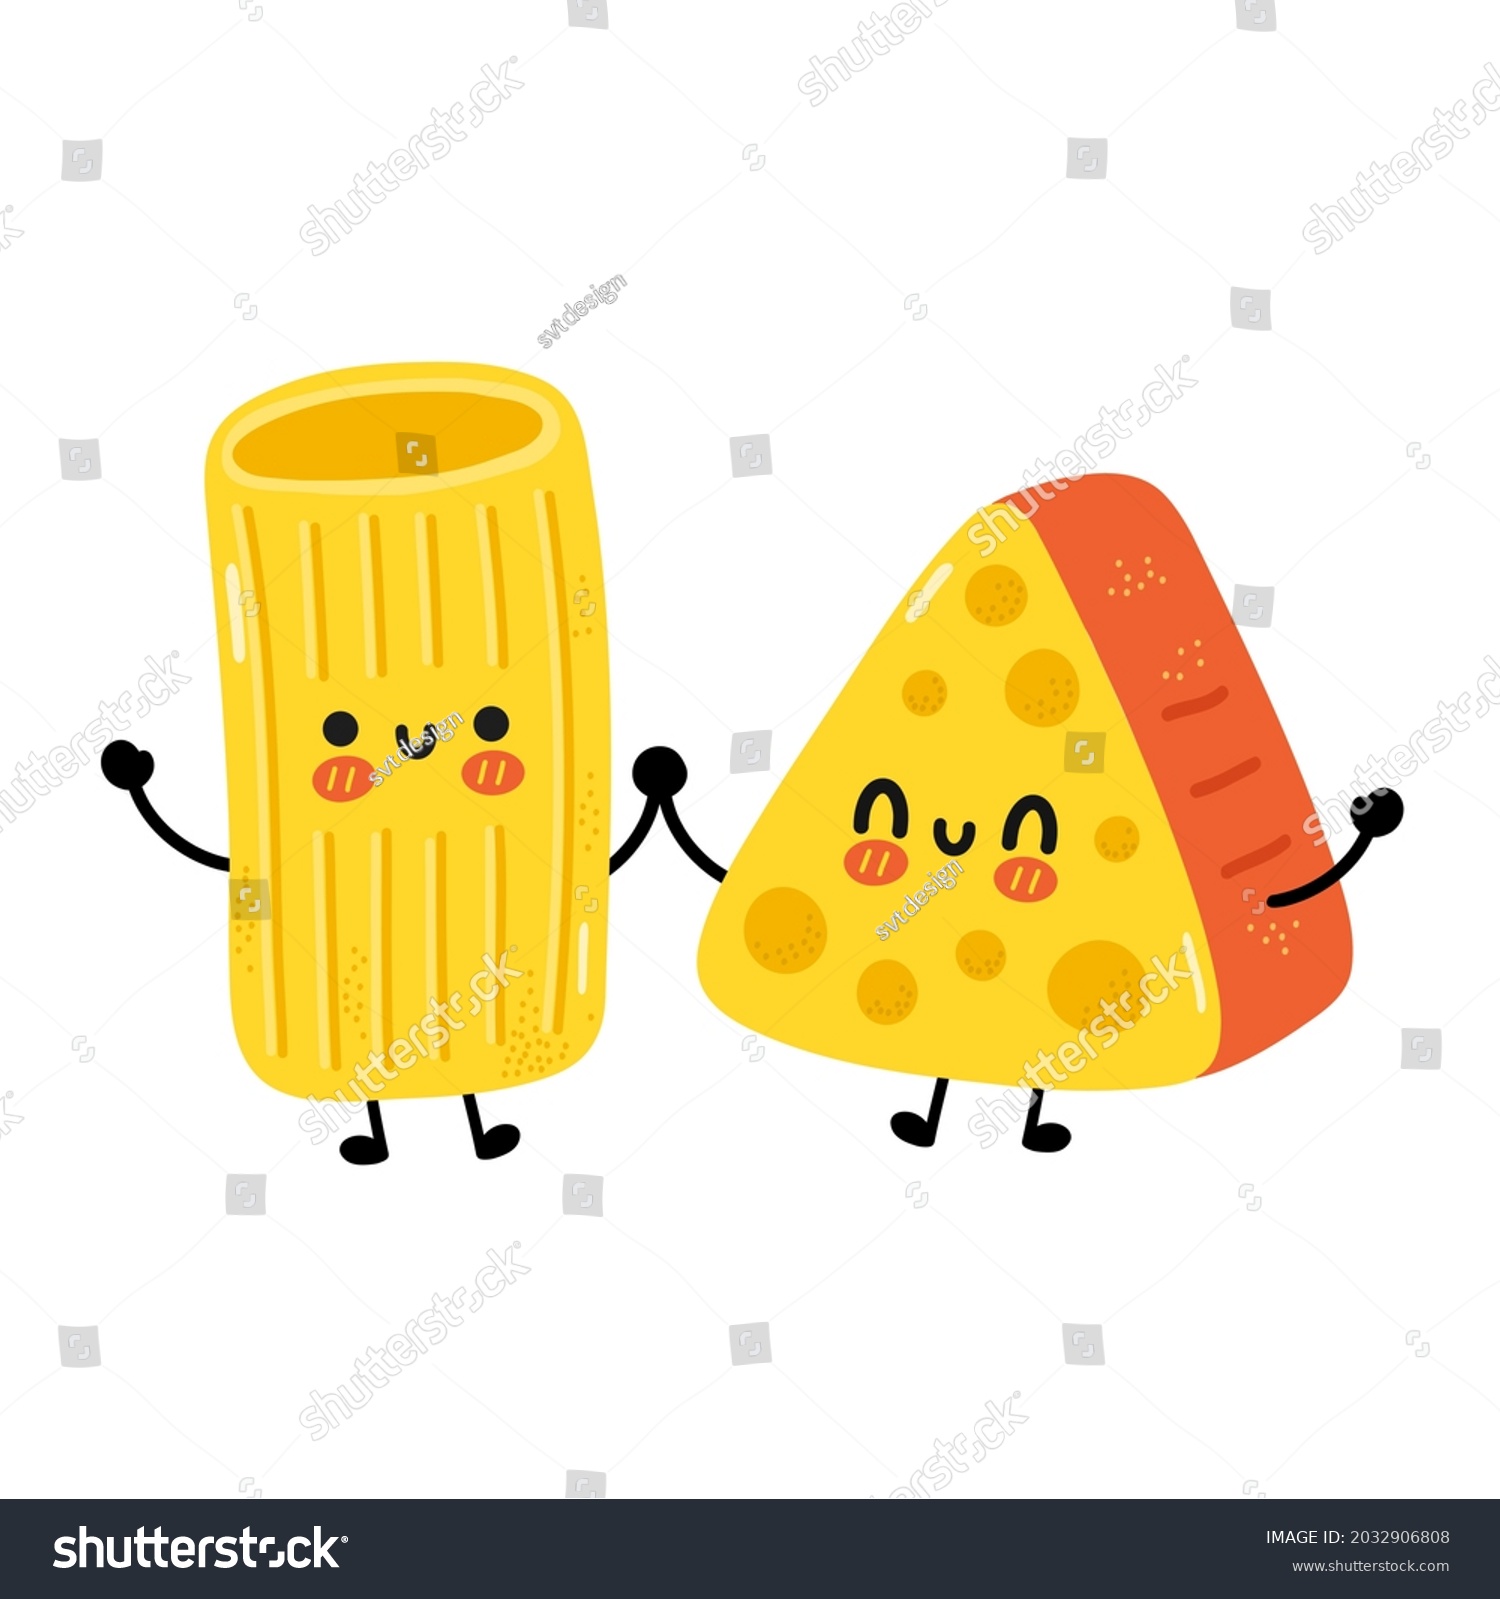 SVG of Cute funny macaroni pasta noodles and cheese character. Vector hand drawn cartoon kawaii character illustration icon. Isolated on white background. Cute macaroni pasta, cheese cartoon mascot concept svg